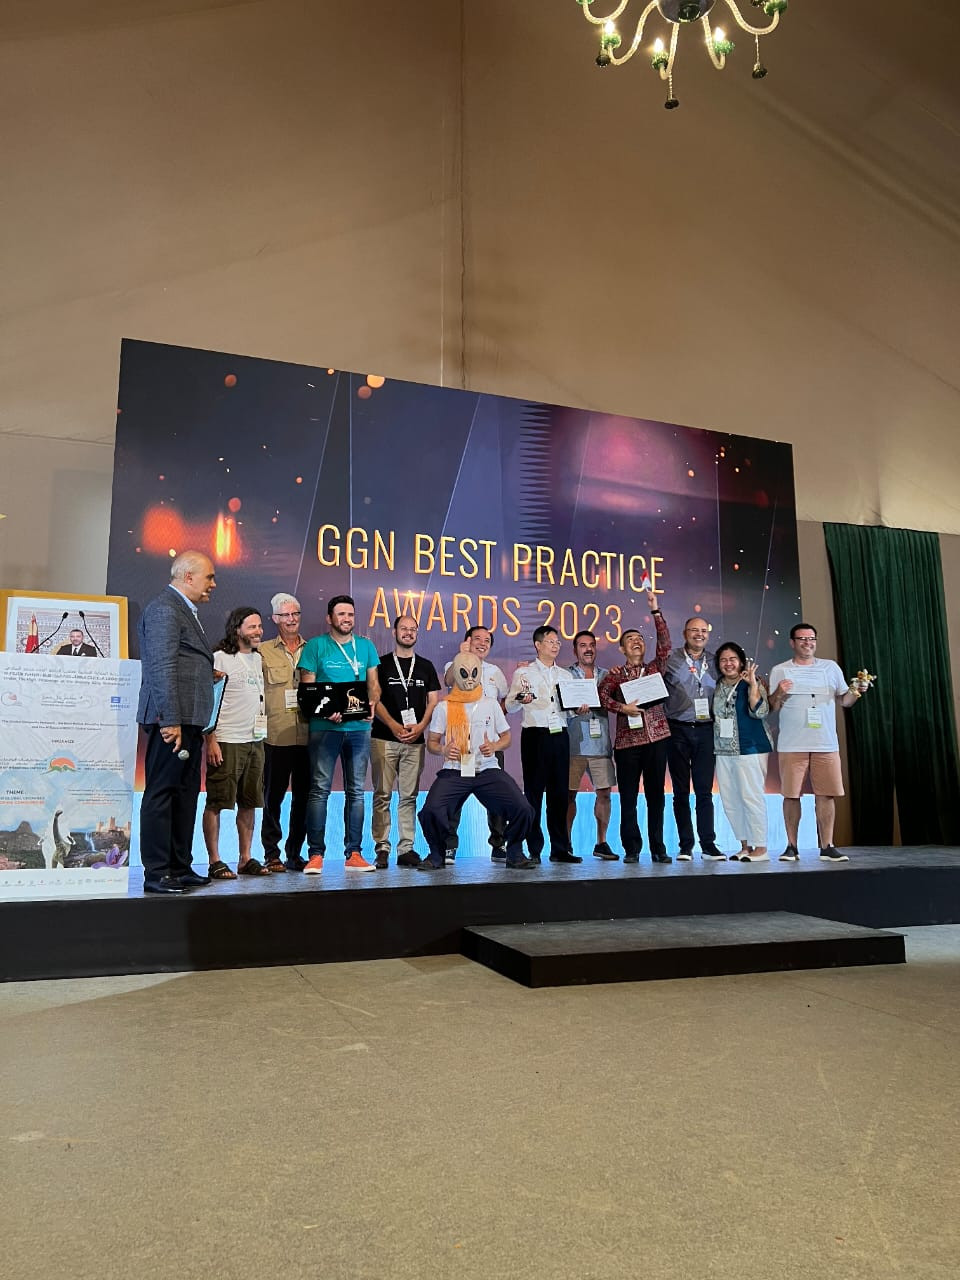 Spectacular! Merangin Jambi Geopark Wins First Place in the World for Best Practice Award 2023